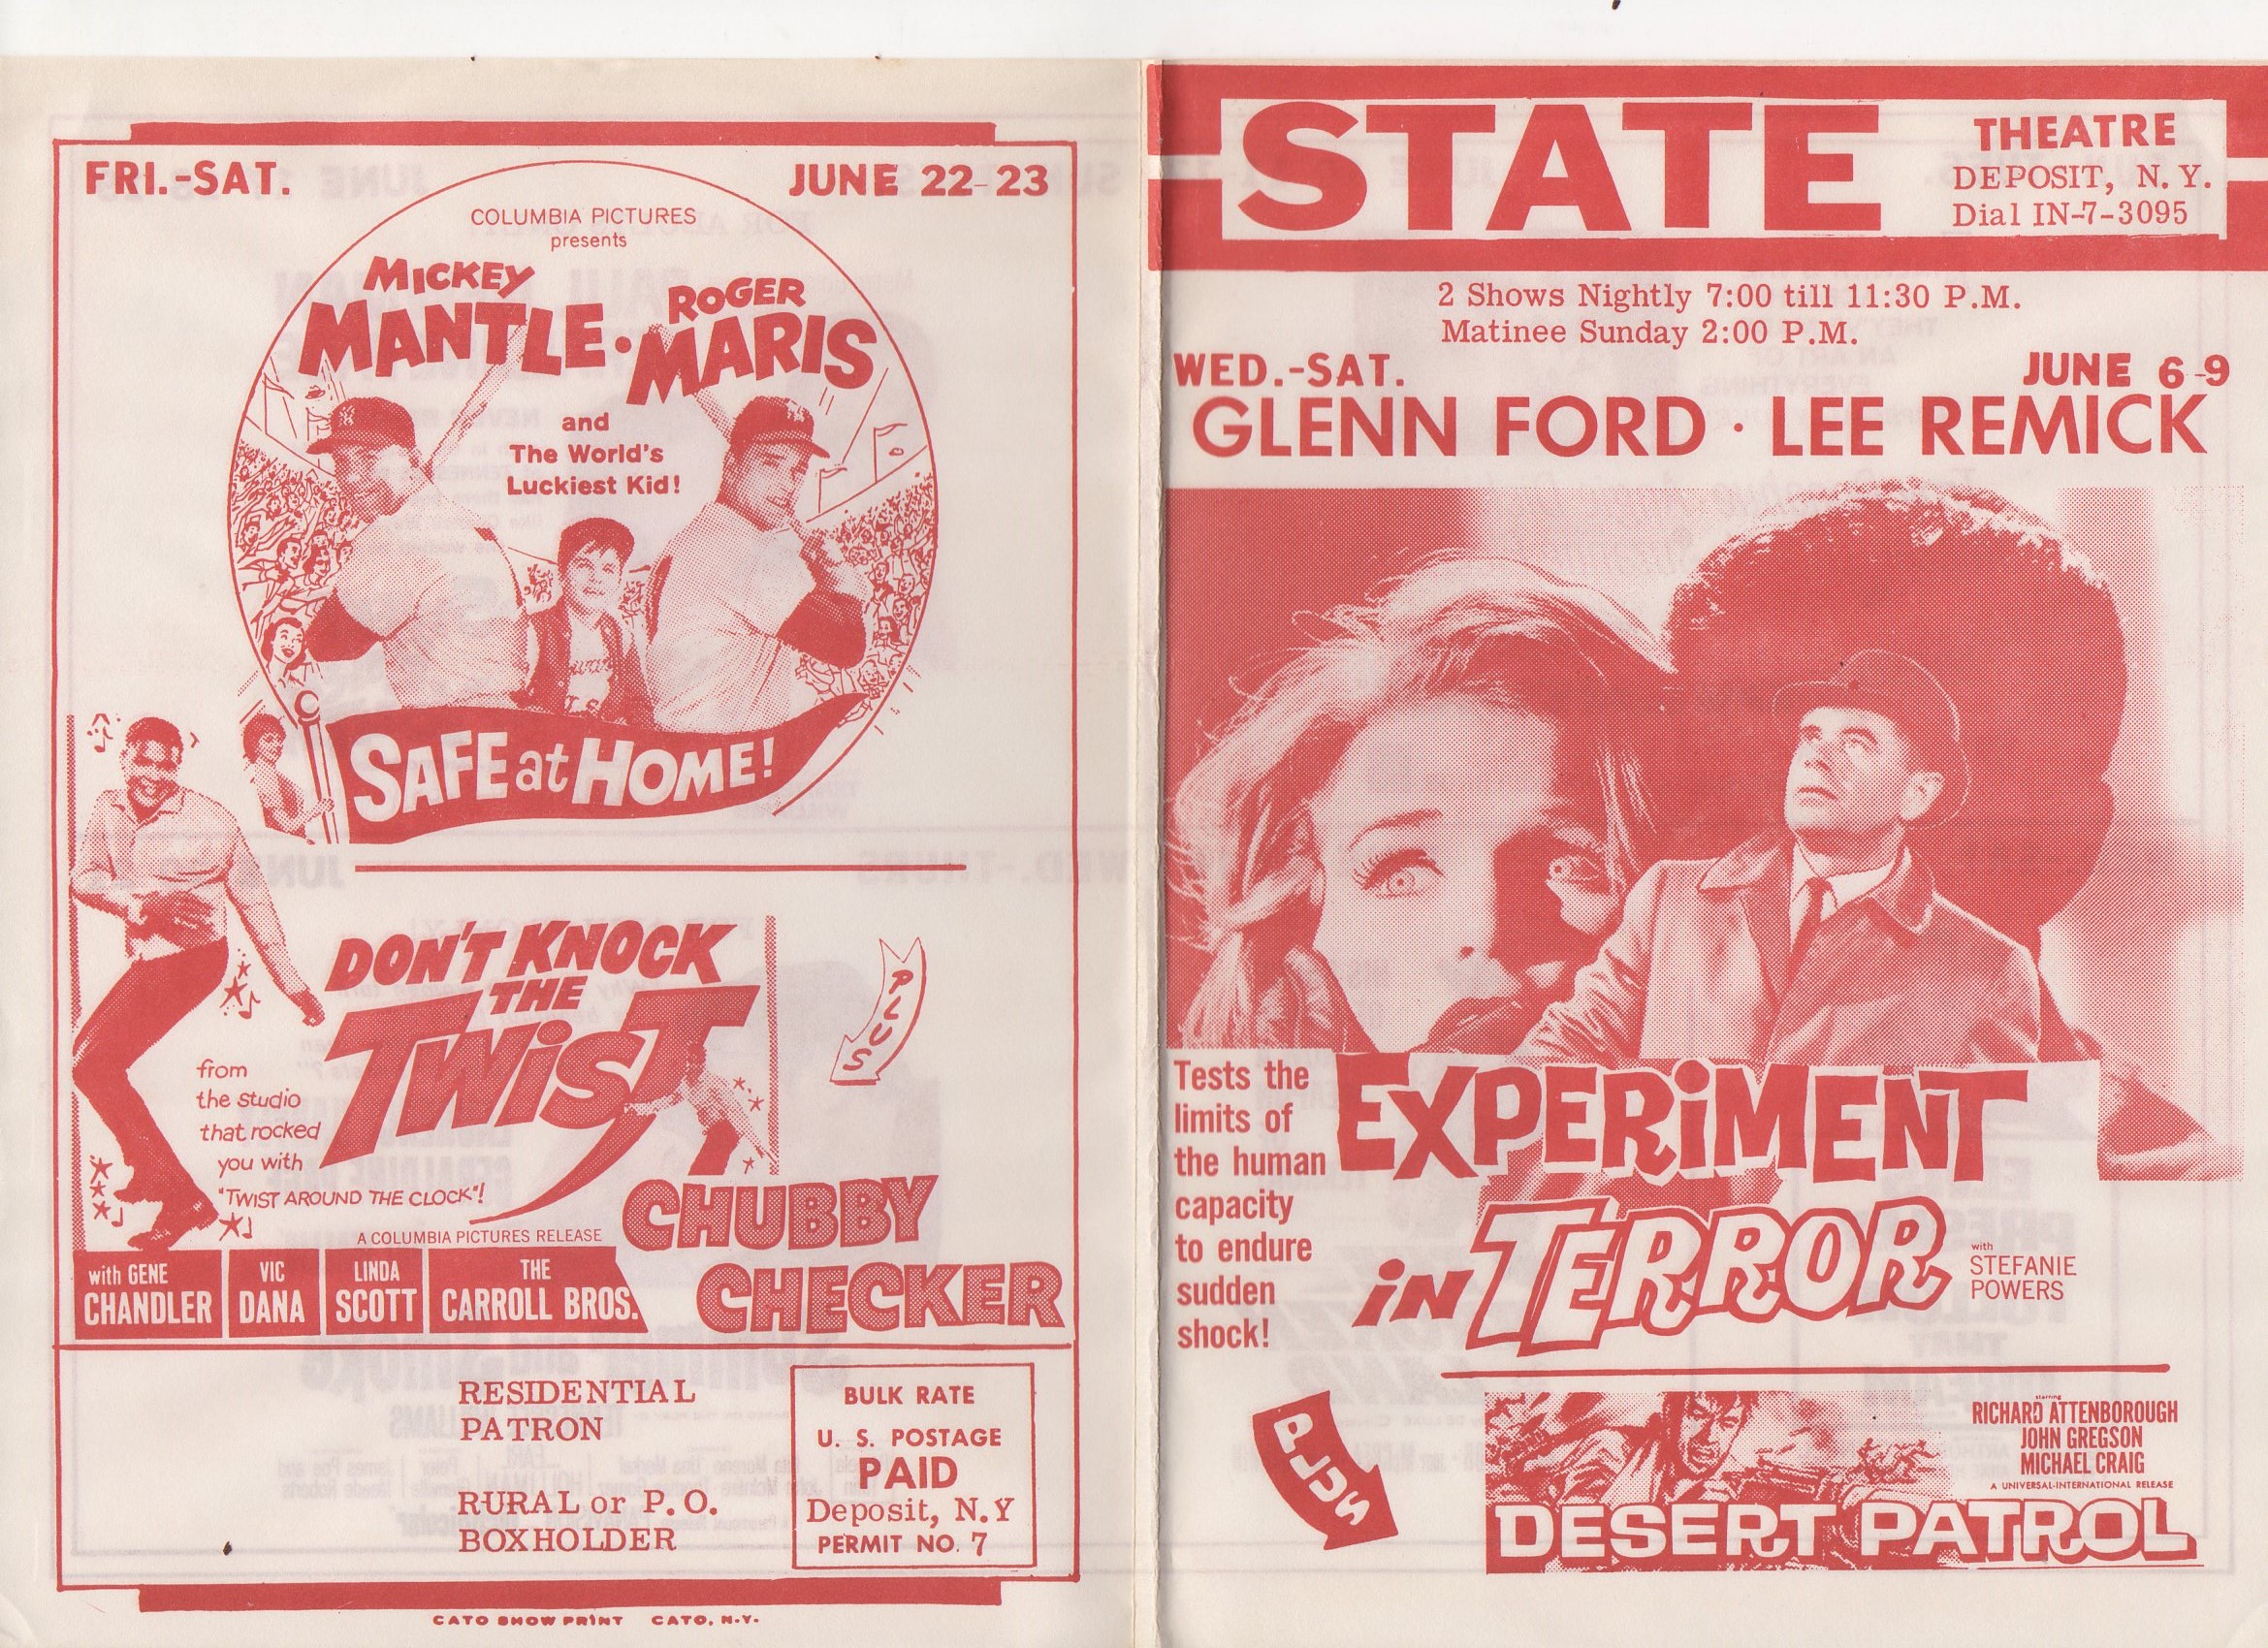 1962 state theatre, deposit, ny, 06/22-23, rare home mailer